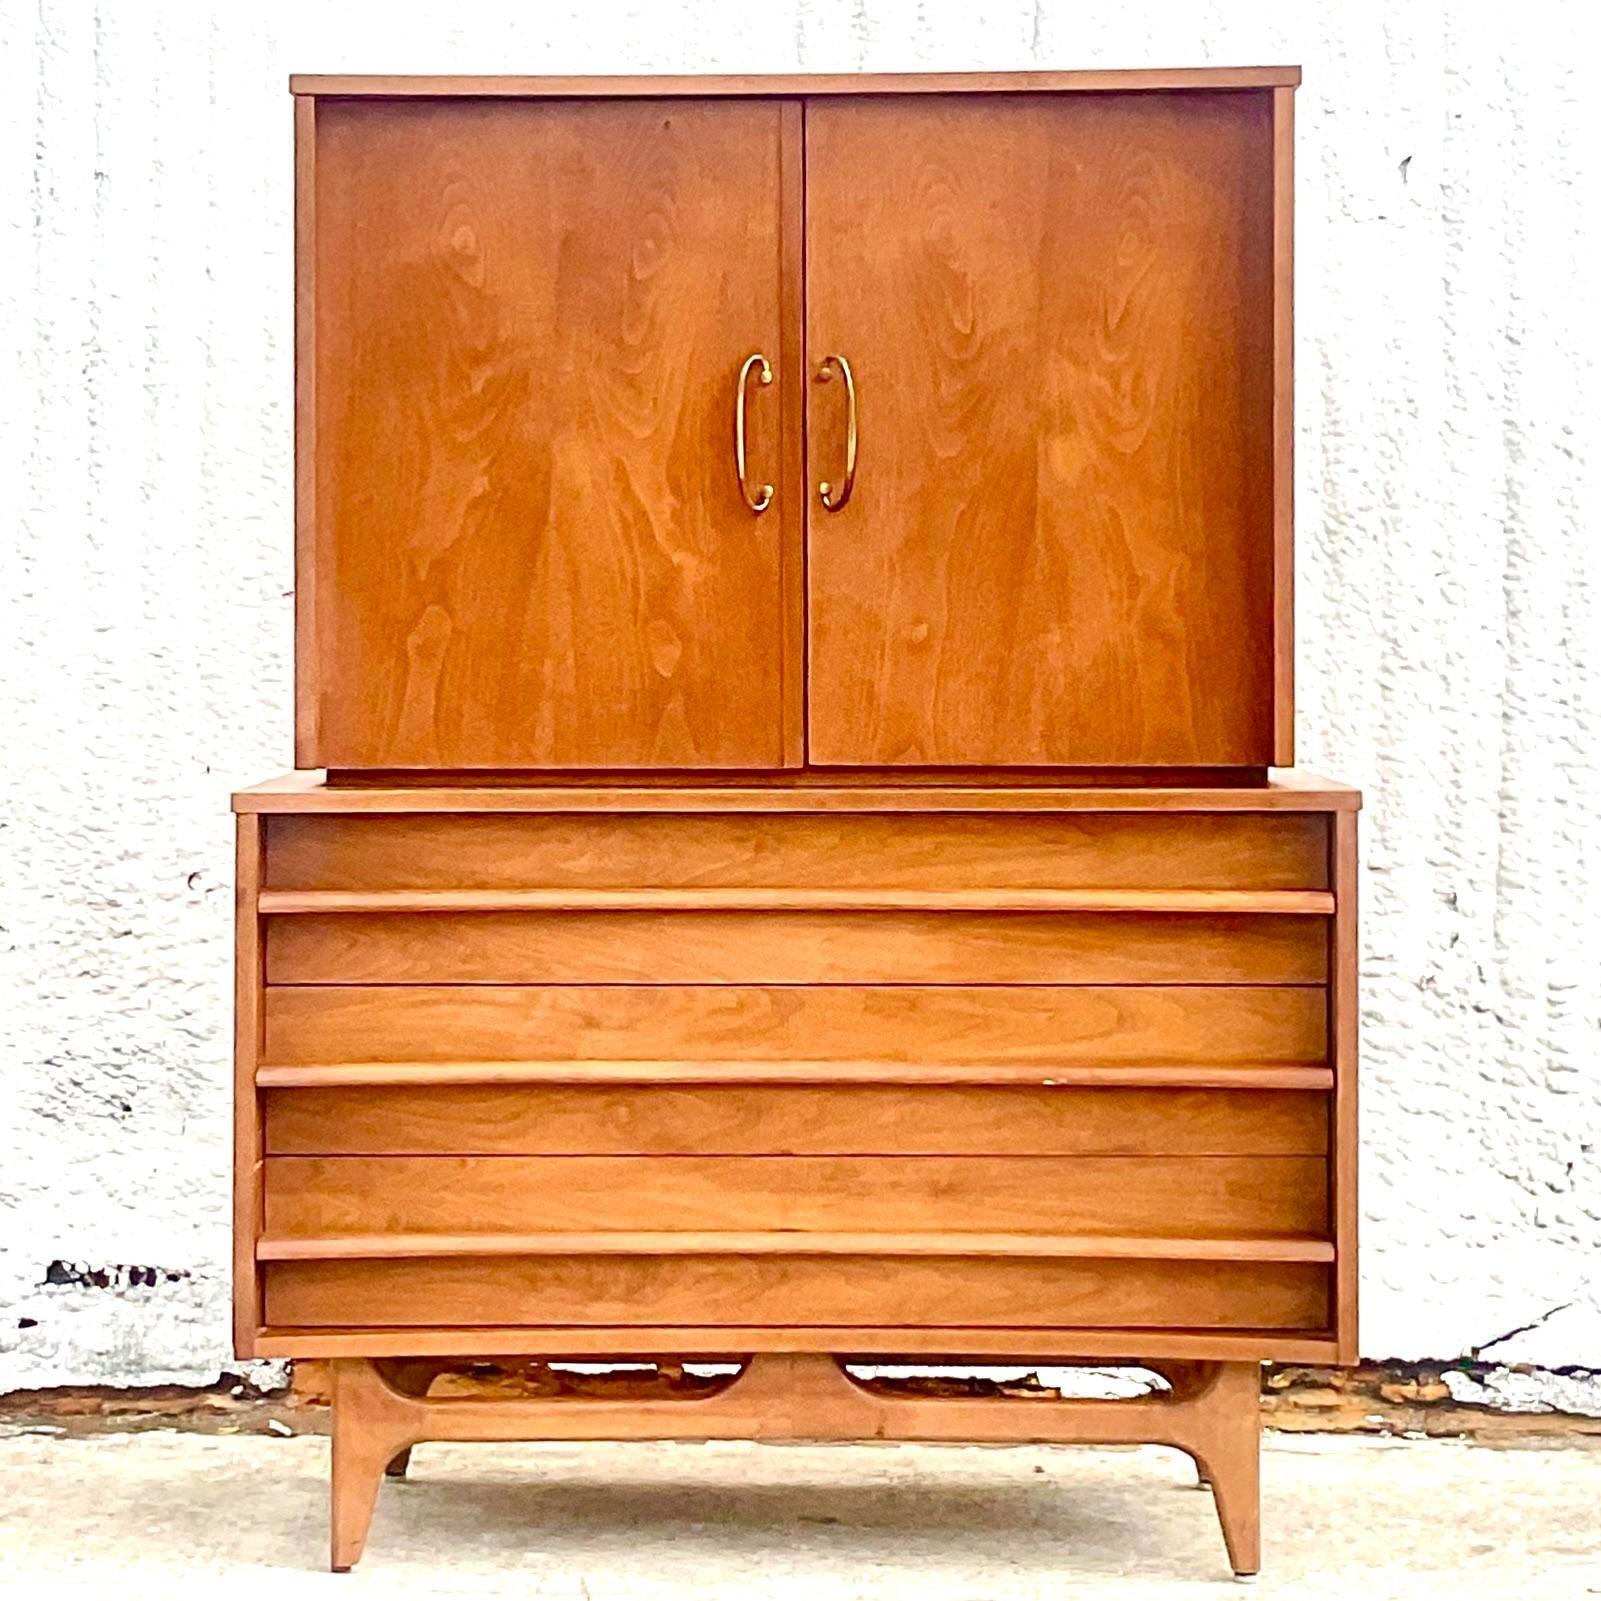 A fabulous vintage MCM Gentleman’s chest of drawers. Made by the iconic Young Young group. Beautiful tall chest with interior drawers and shelving. Acquired from a Palm Beach estate.